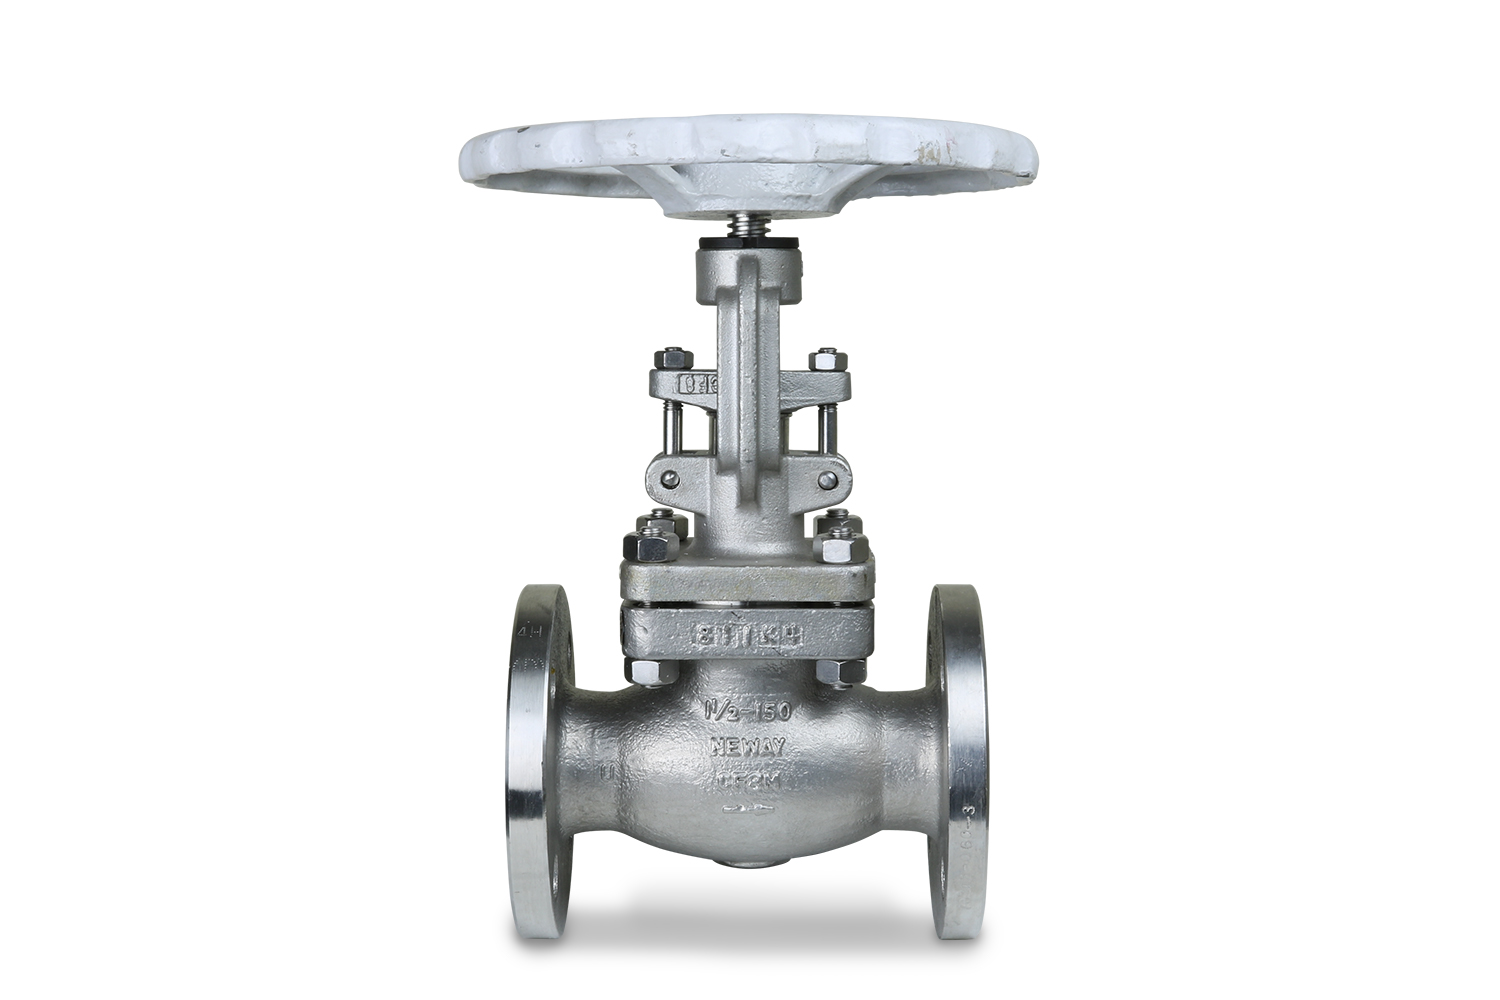 What Is a Globe Valve?